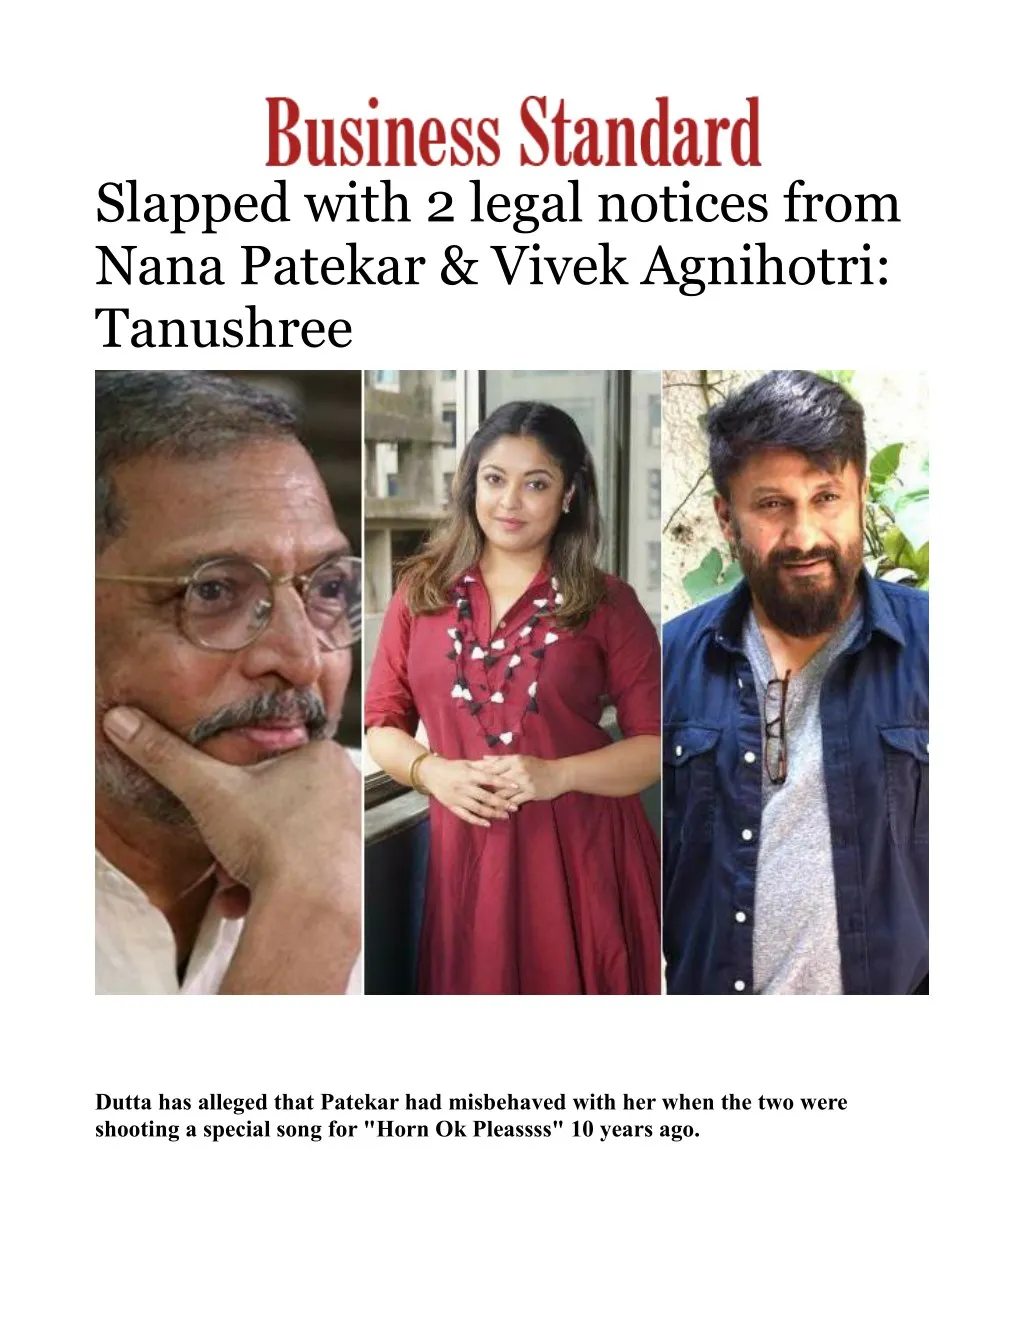 slapped with 2 legal notices from nana patekar